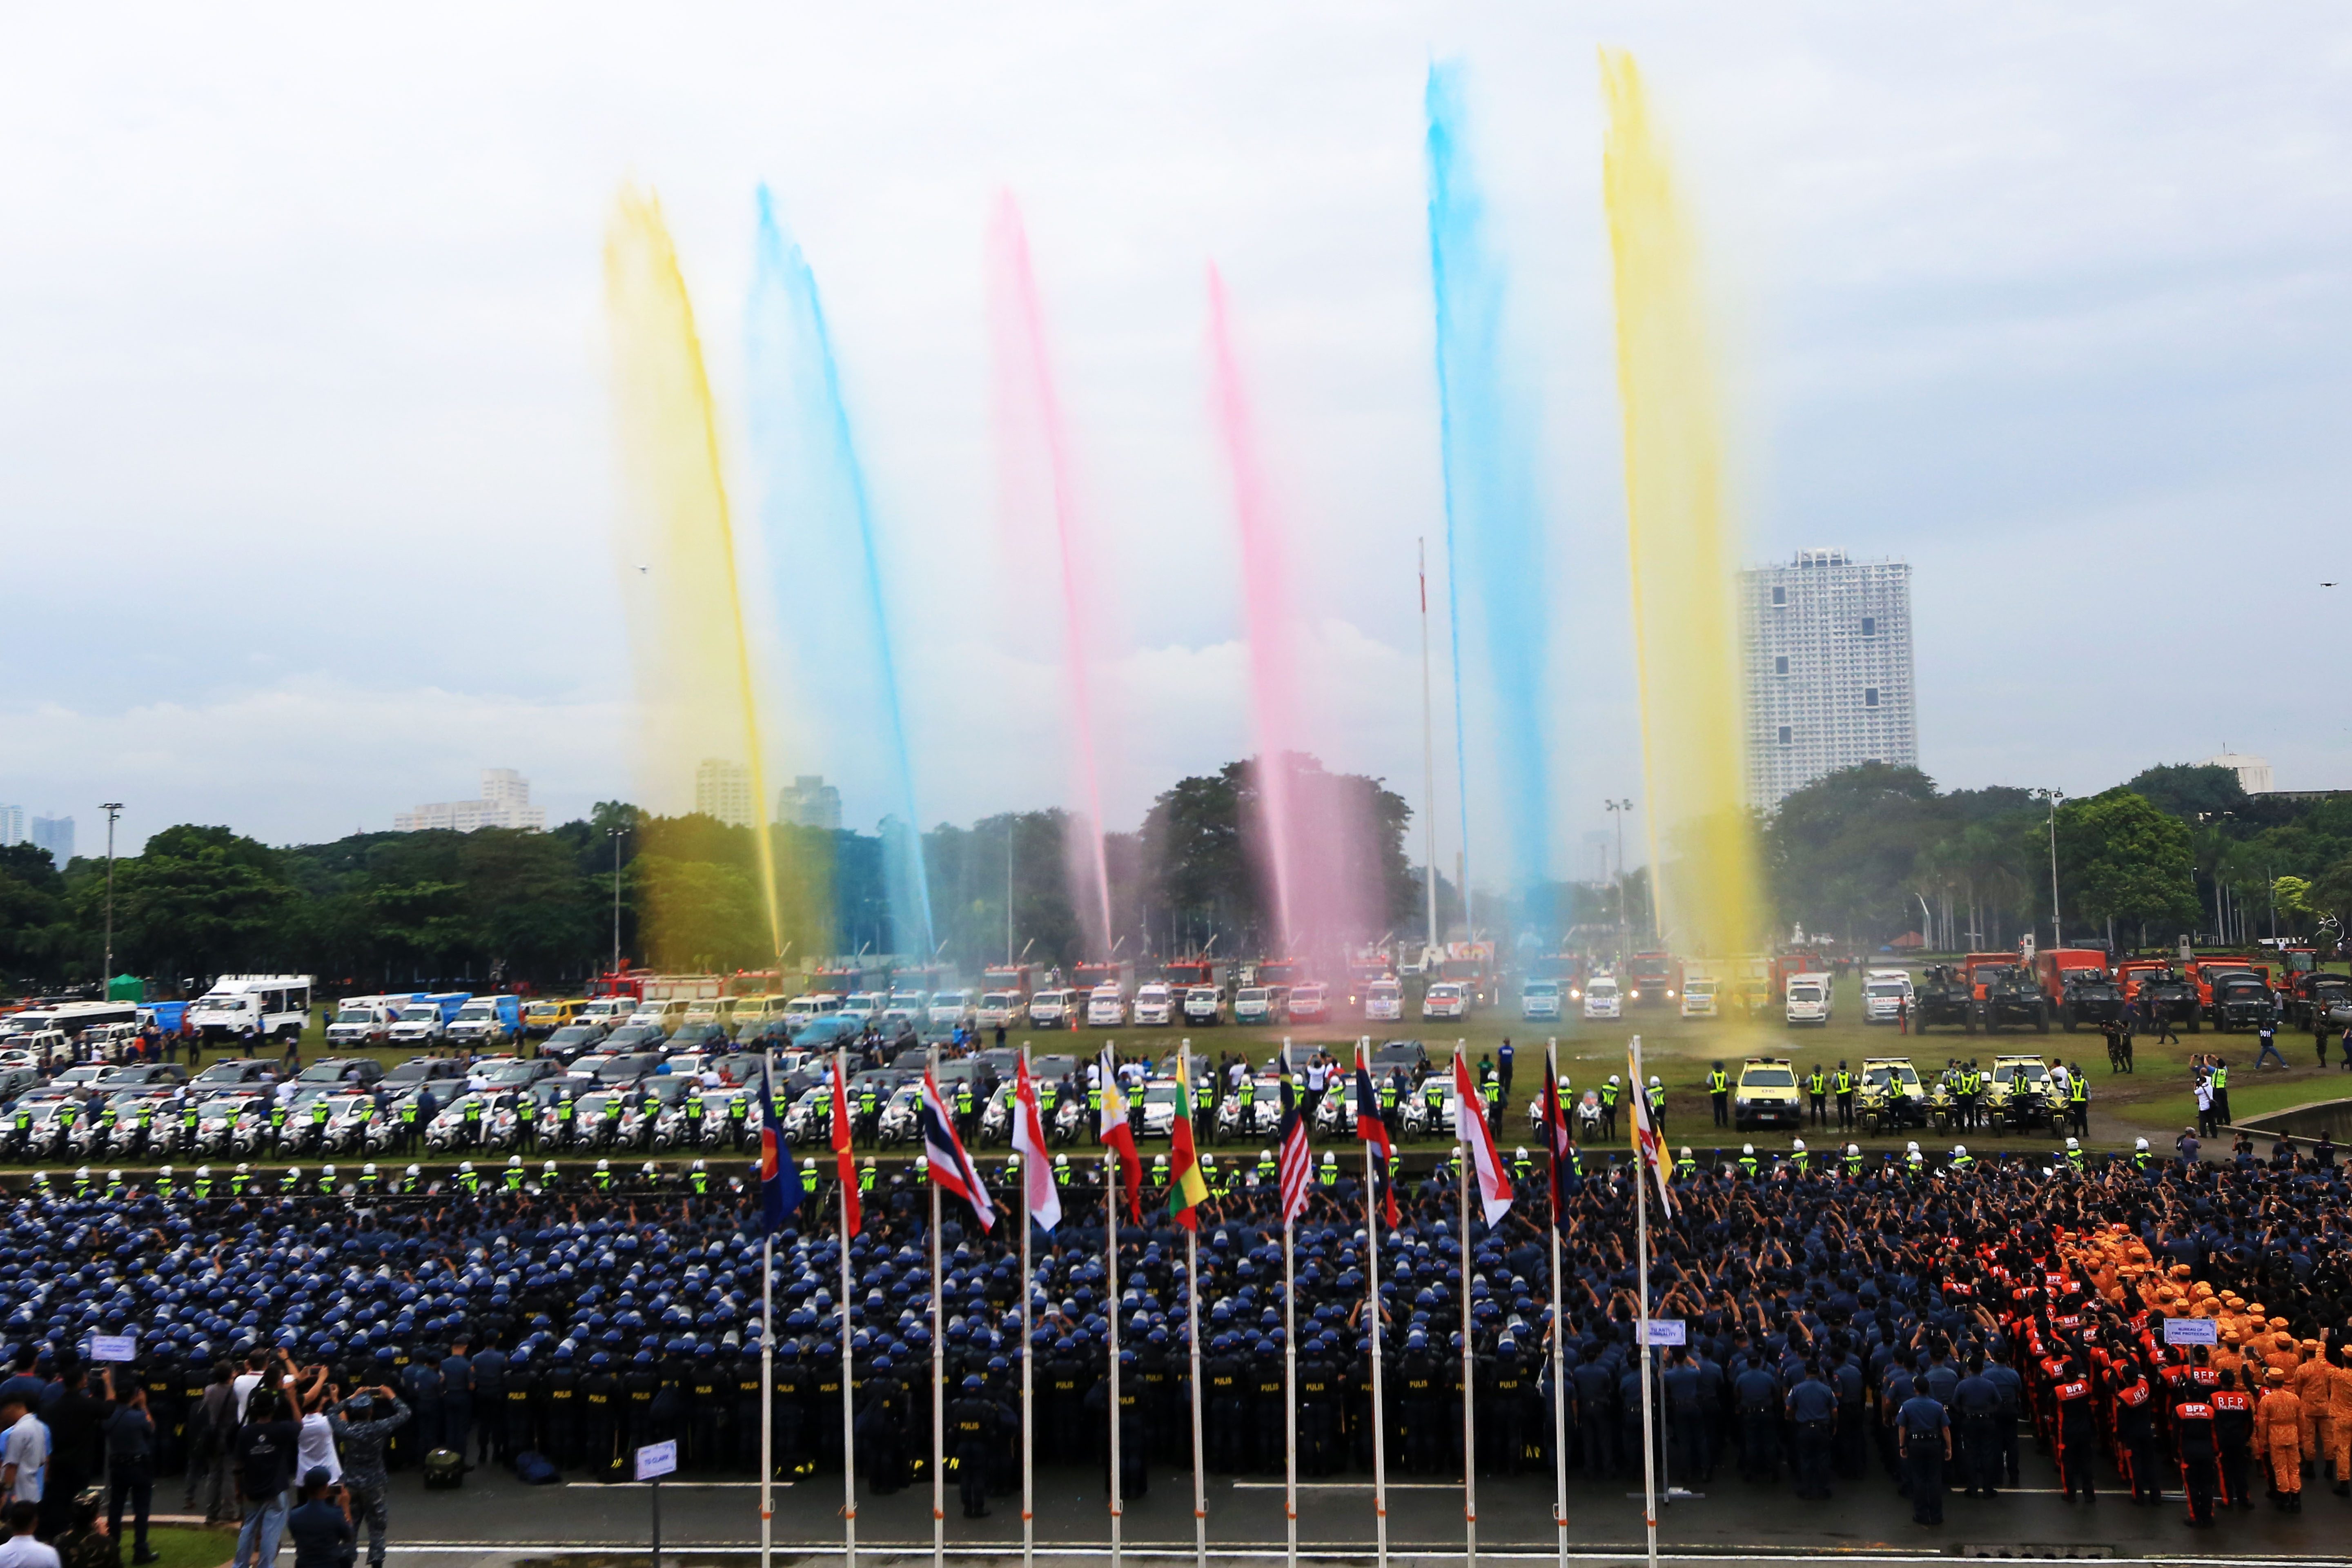 SEND-OFF. Participating agencies for the implementation of security for the coming ASEAN Summit gather at the Quirino Grandstand in Manila for their deployment on November 5, 2017. Photo by Ben Nabong/Rappler 